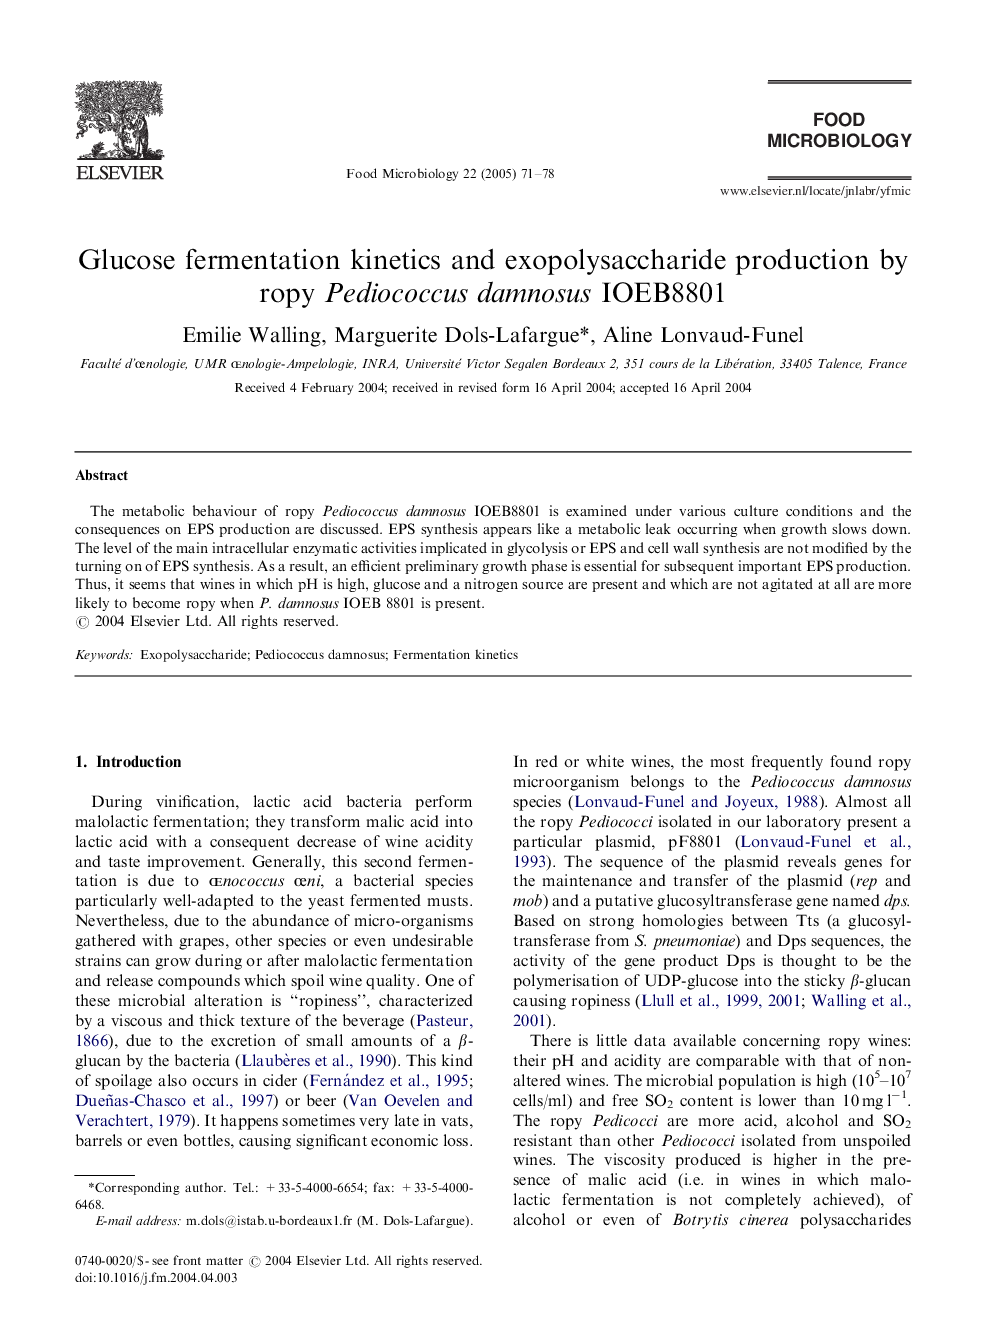 Glucose fermentation kinetics and exopolysaccharide production by ropy Pediococcus damnosus IOEB8801